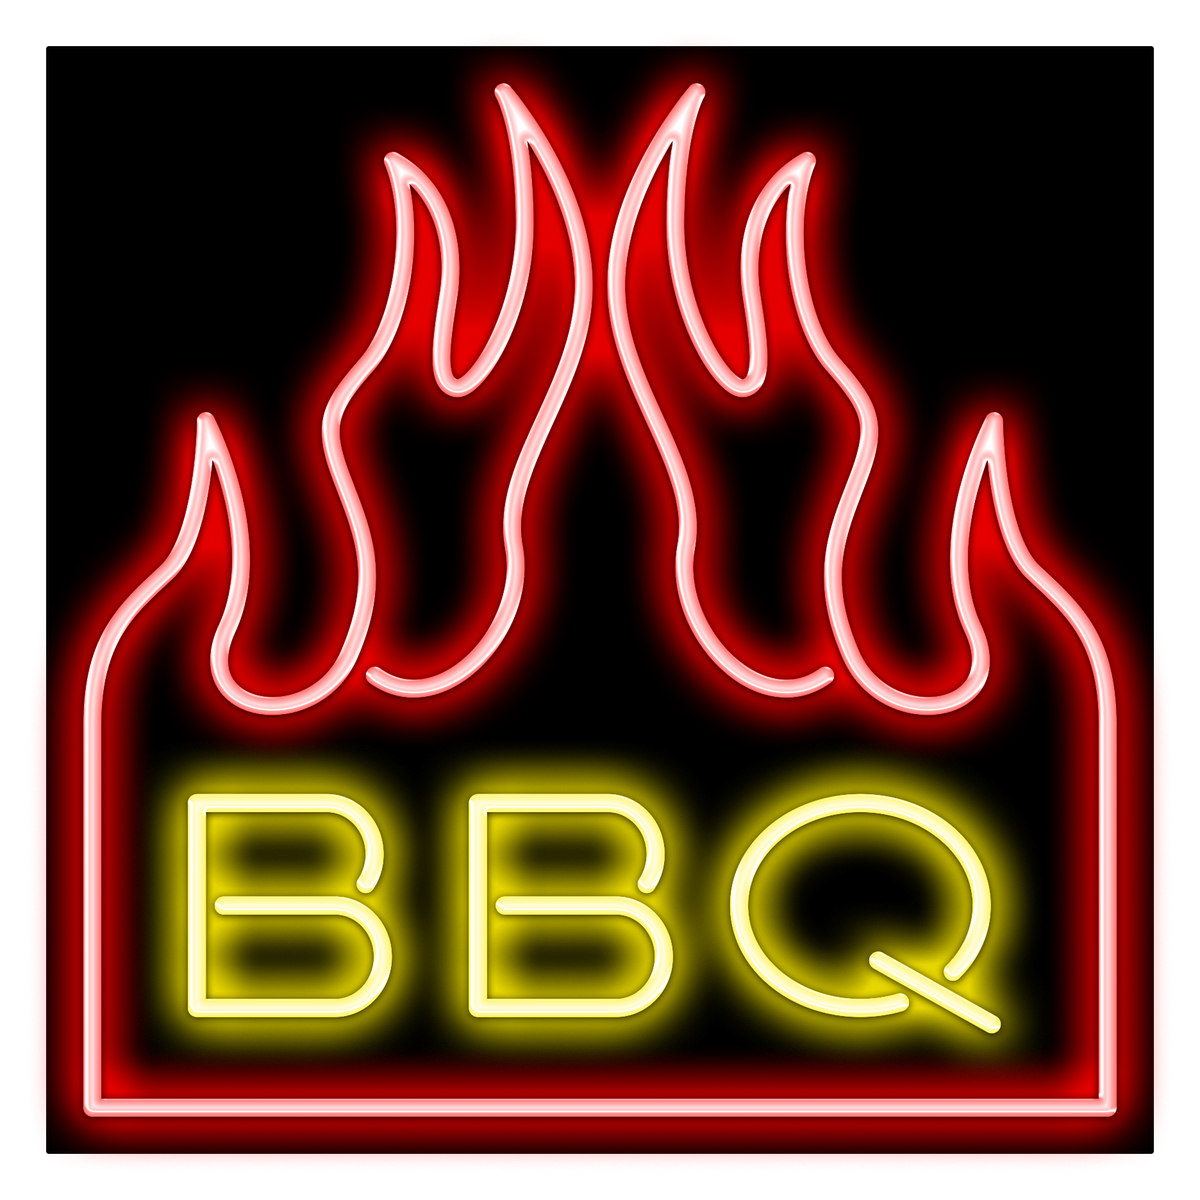 BBQ Neon Sign with Bar-B-que Flames Square – Fire House Neon Signs